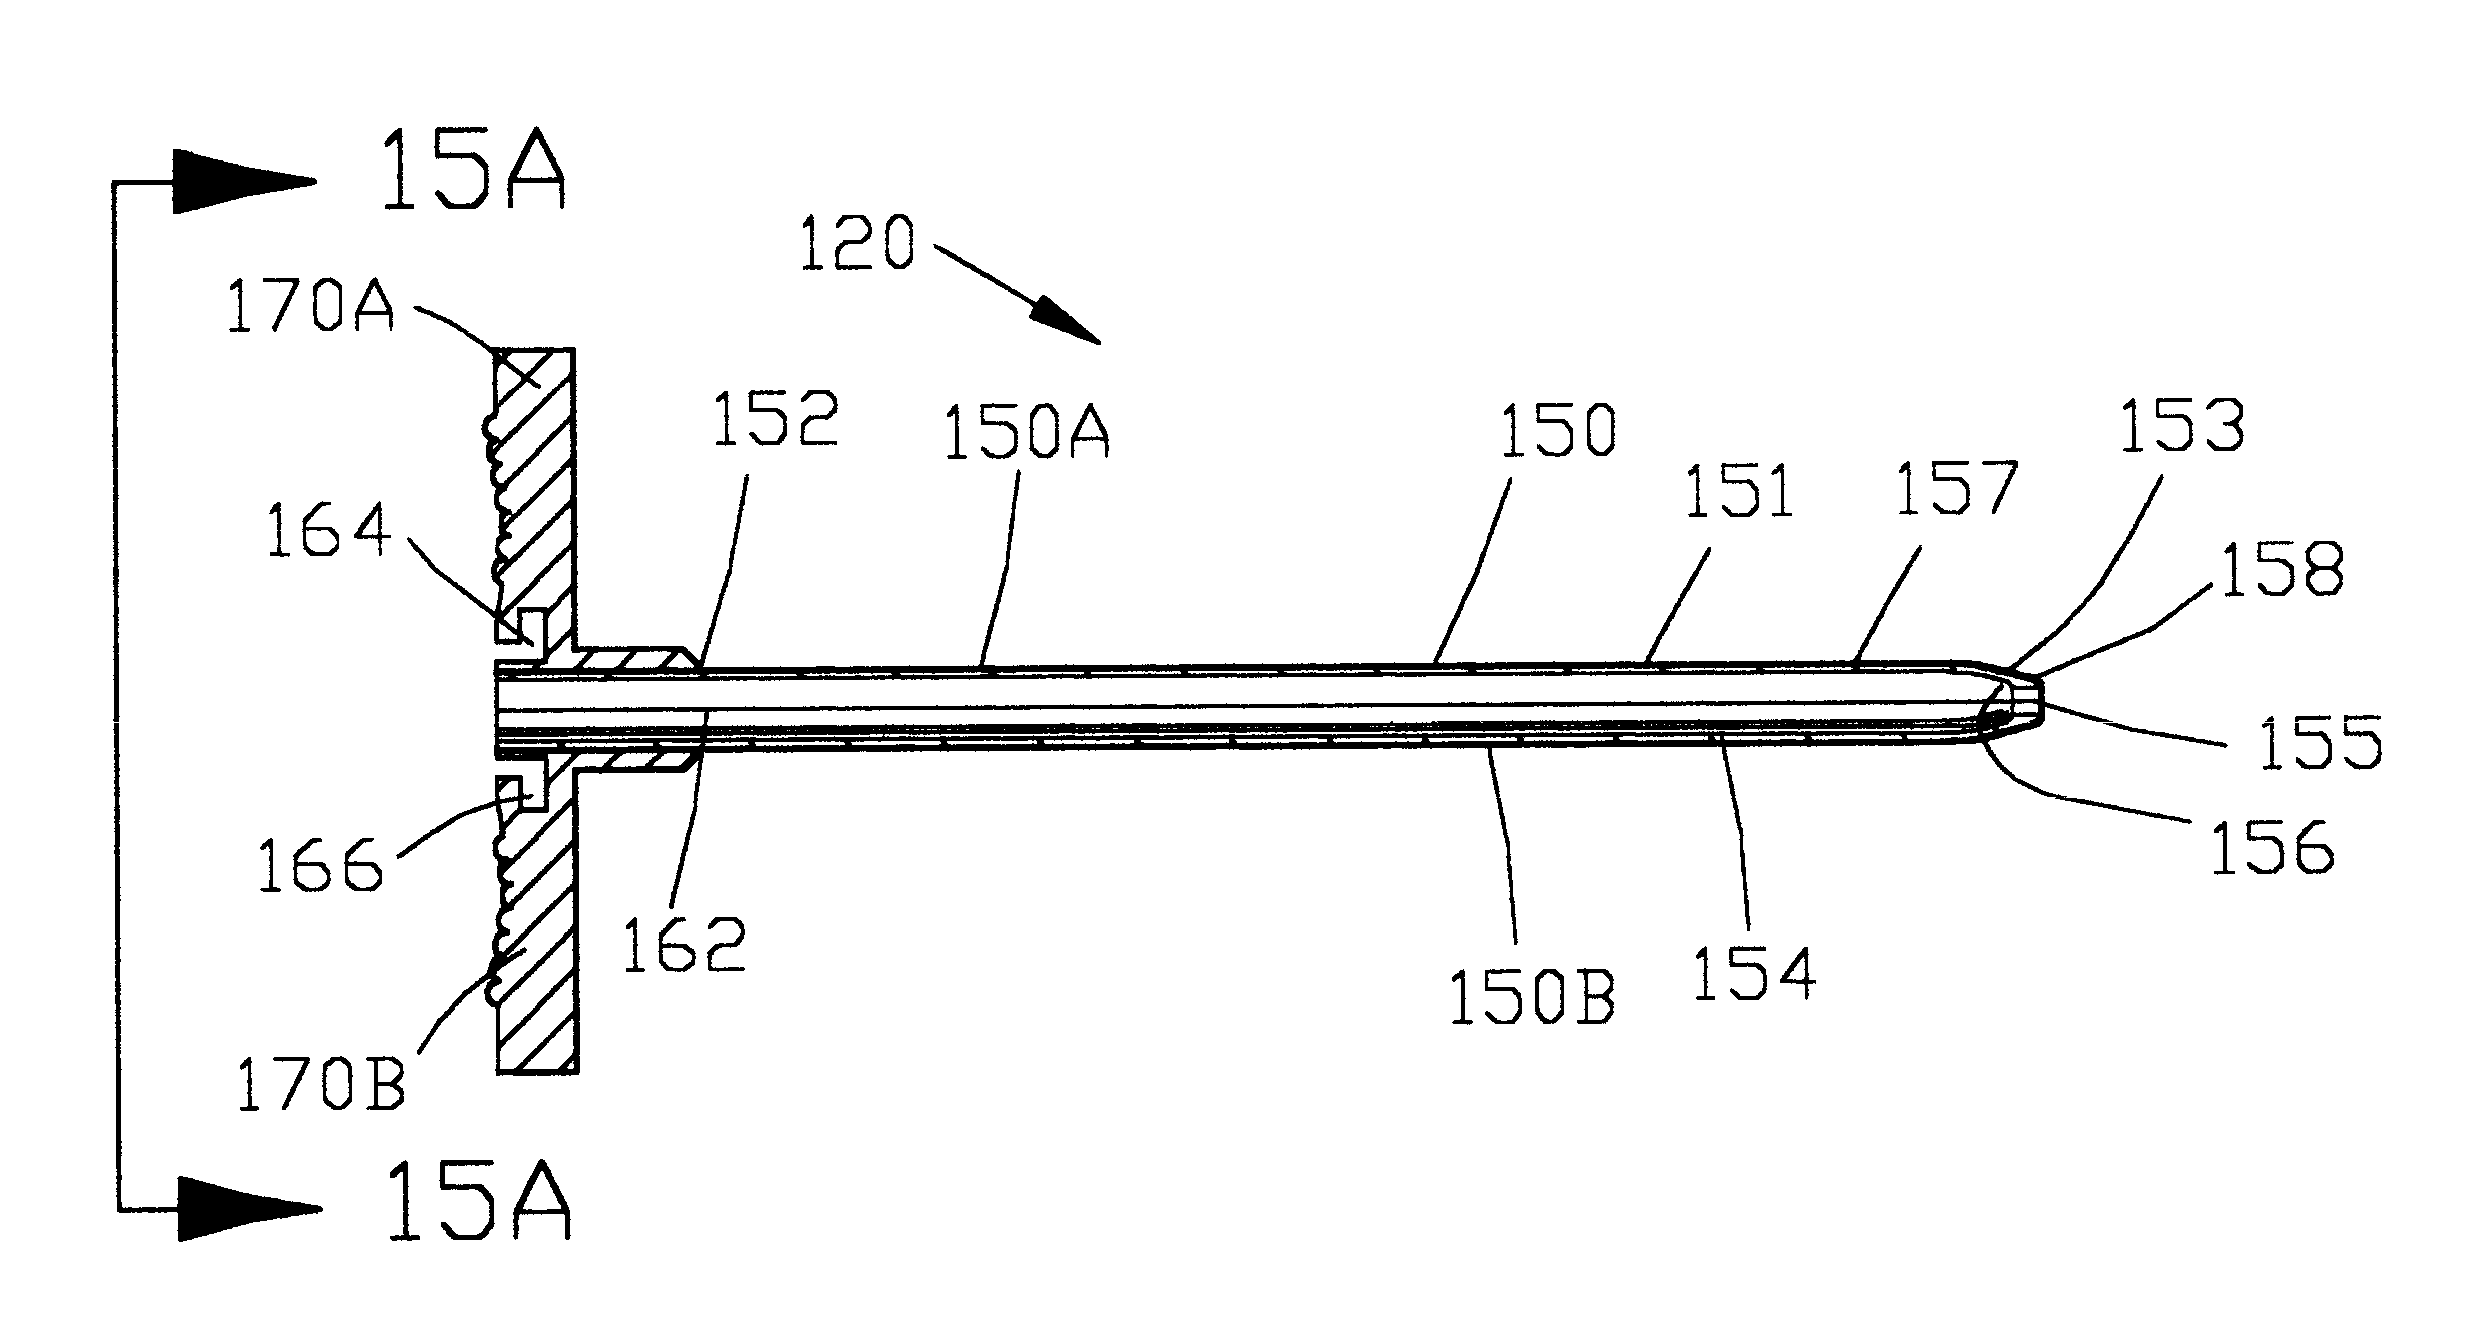 Apparatus for inserting medical device